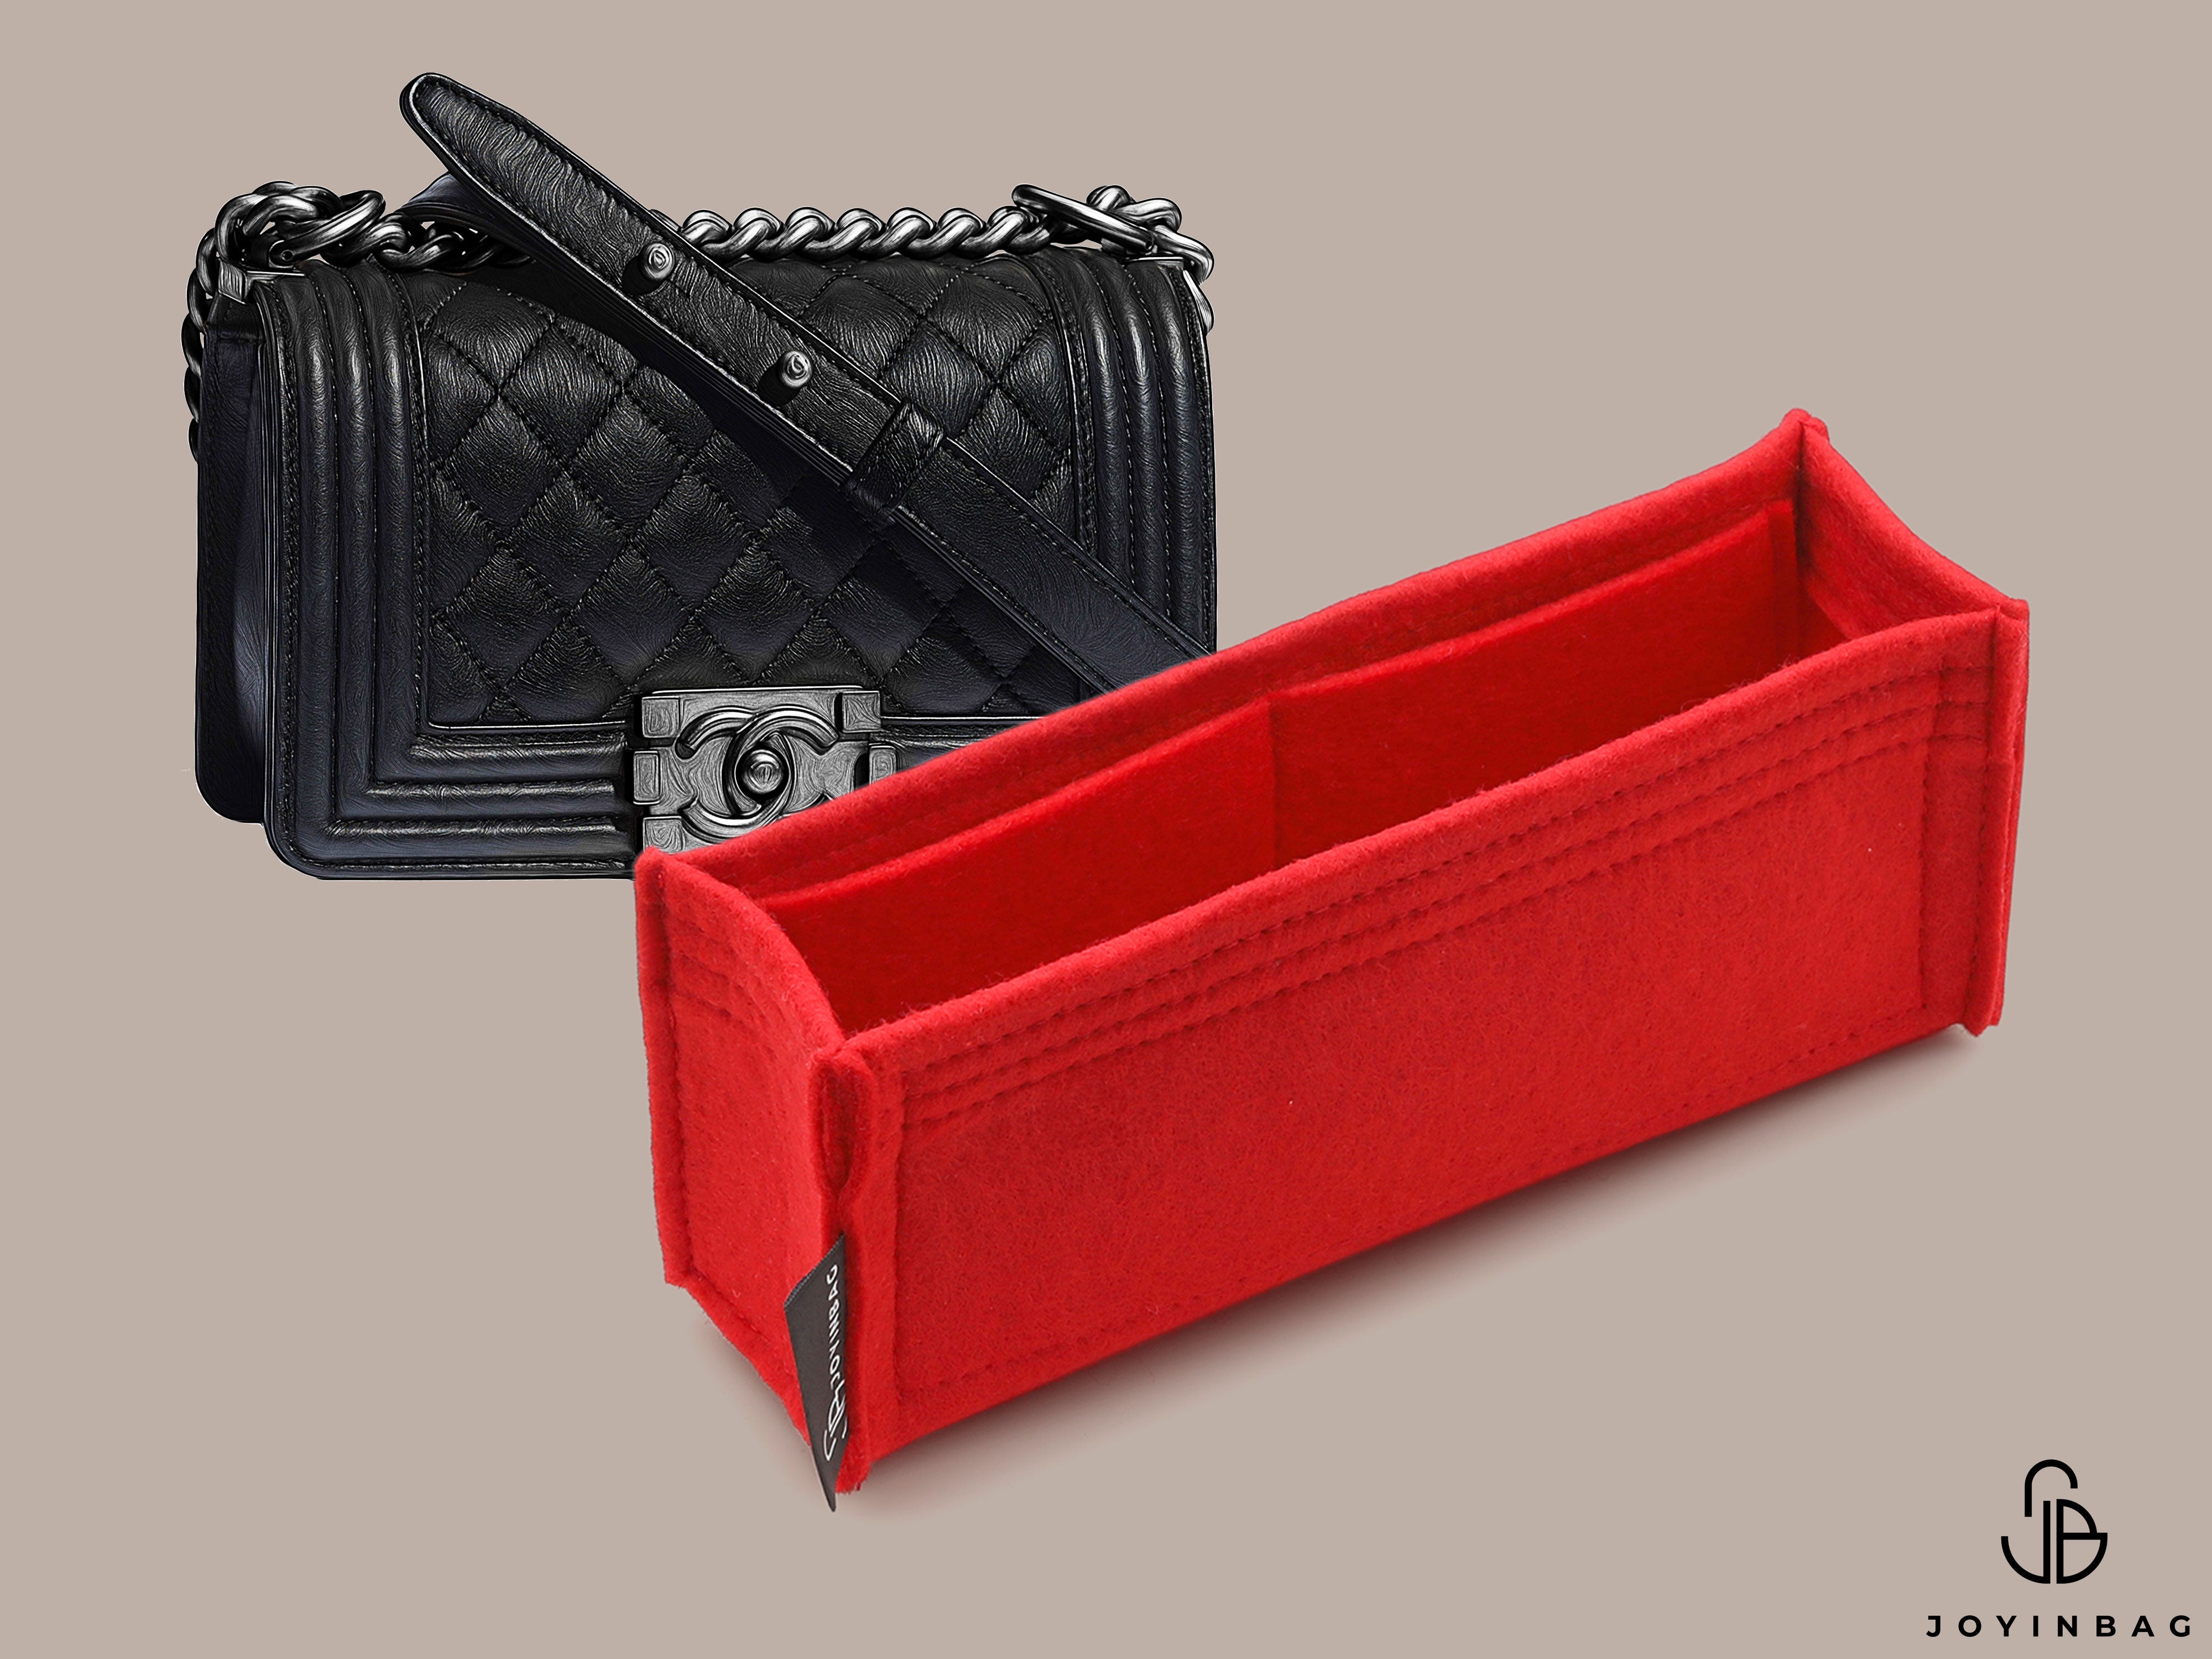 Bag Organizers and Purse Inserts - For Chanel - Zepmade